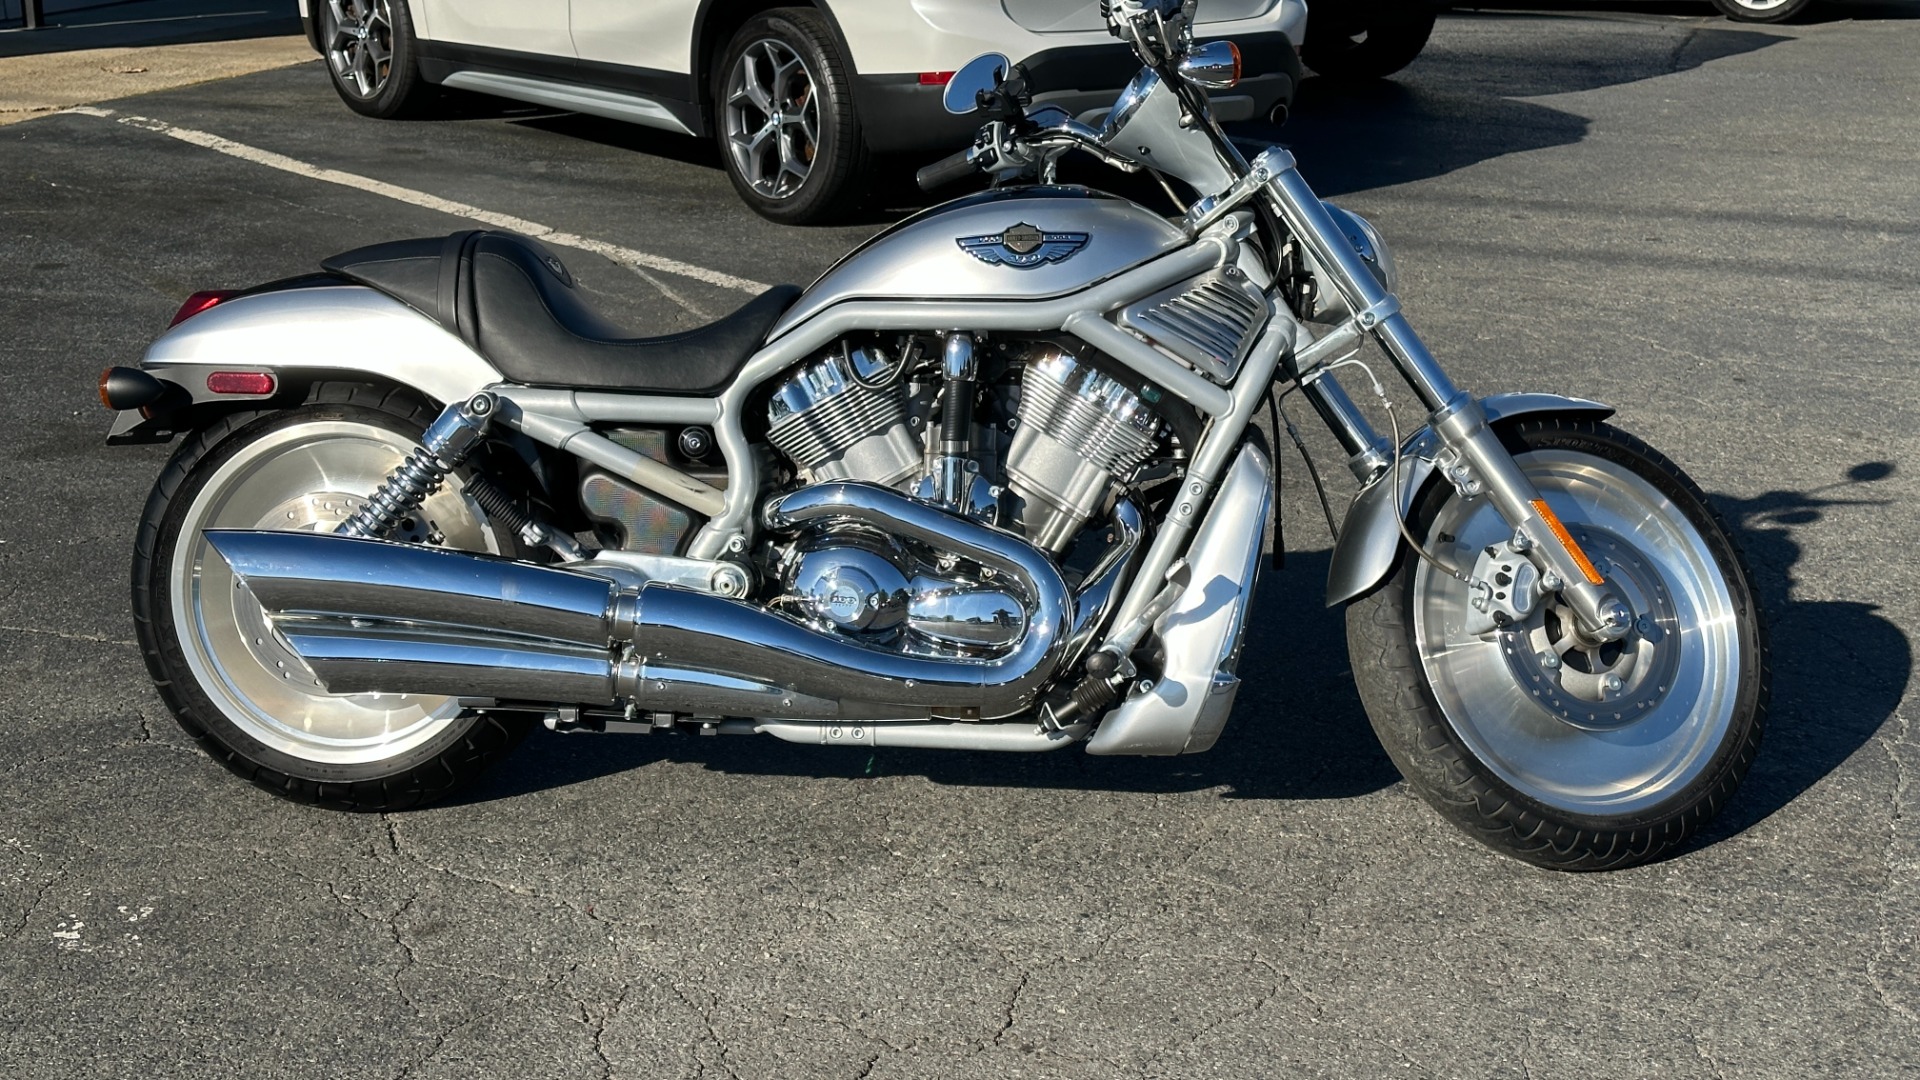 Used 2003 Harley Davidson V Rod ANNIVERSARY EDITION / 1130CC ENGINE / BREMBO BRAKES / VORTEX AIR SCOOPS for sale $7,695 at Formula Imports in Charlotte NC 28227 3